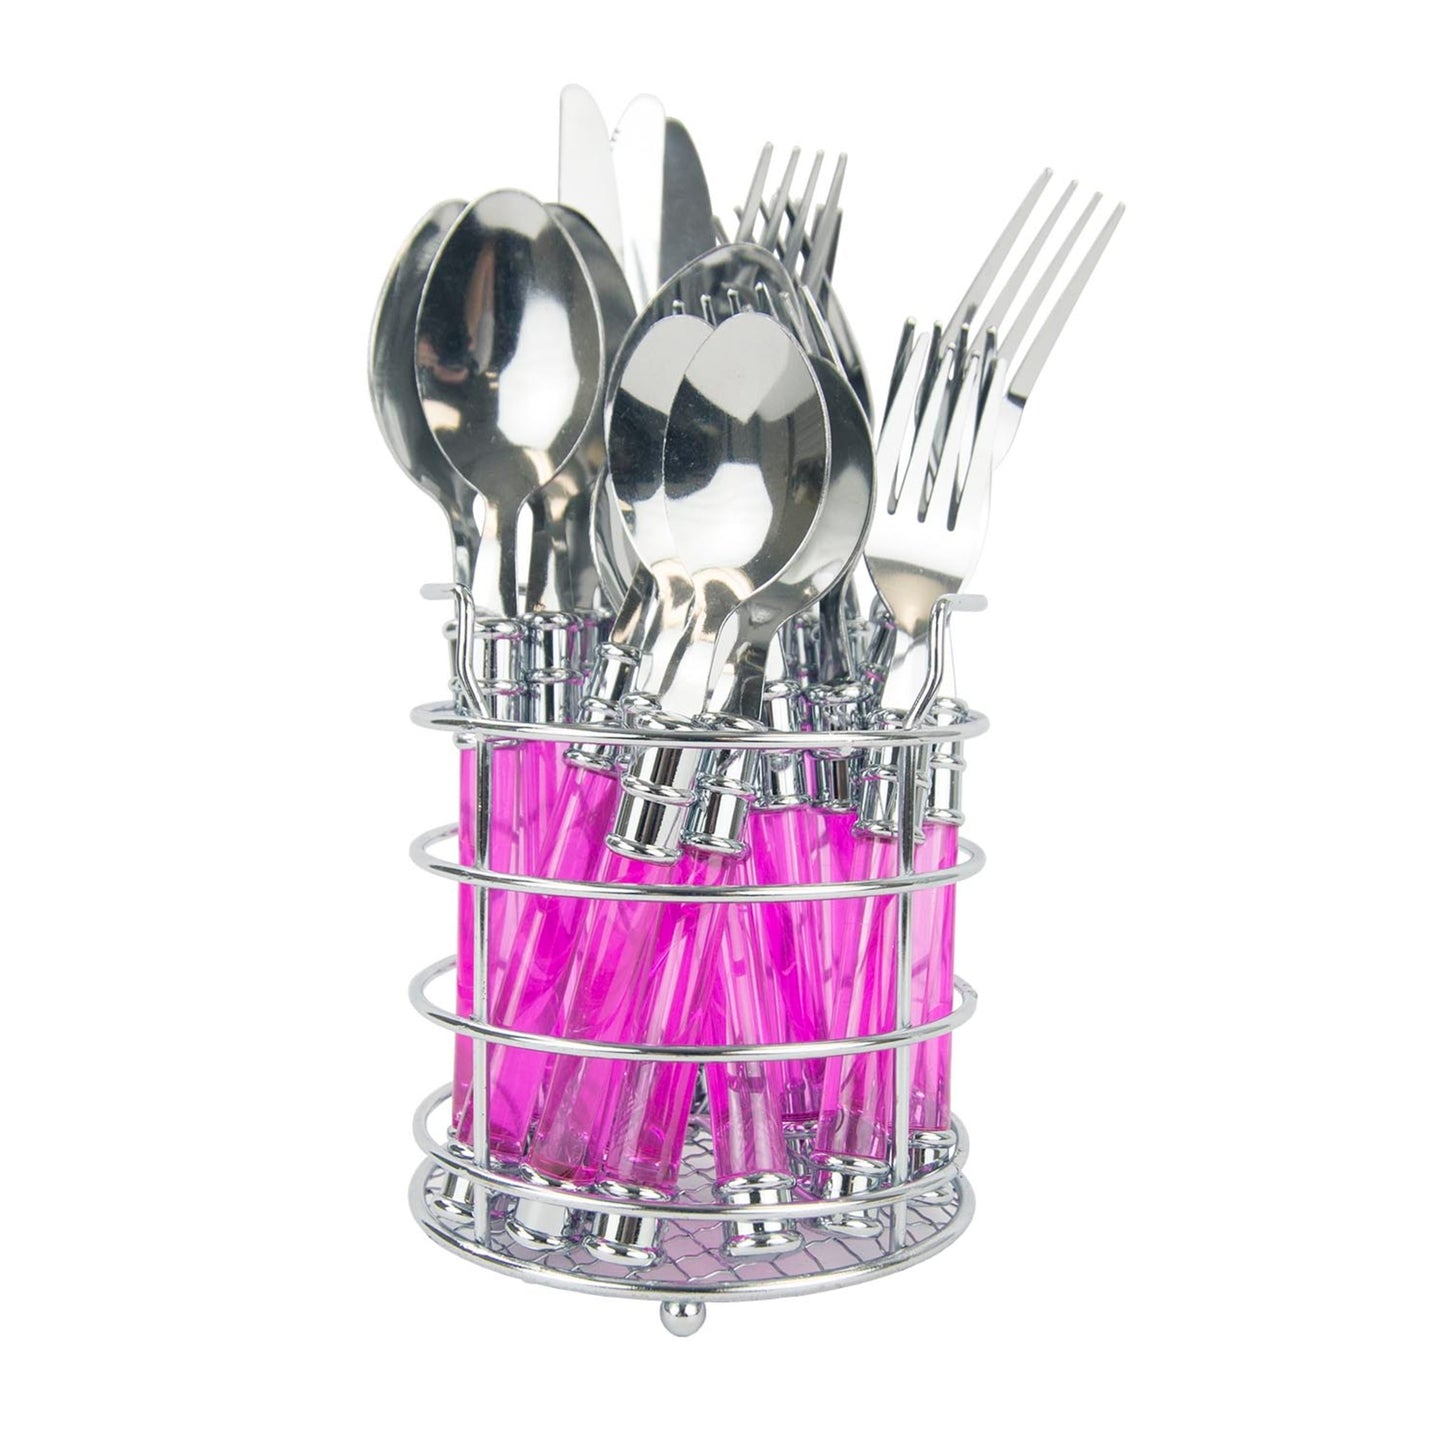 Home Basics 20 Piece Flatware Set with Caddy - Pink